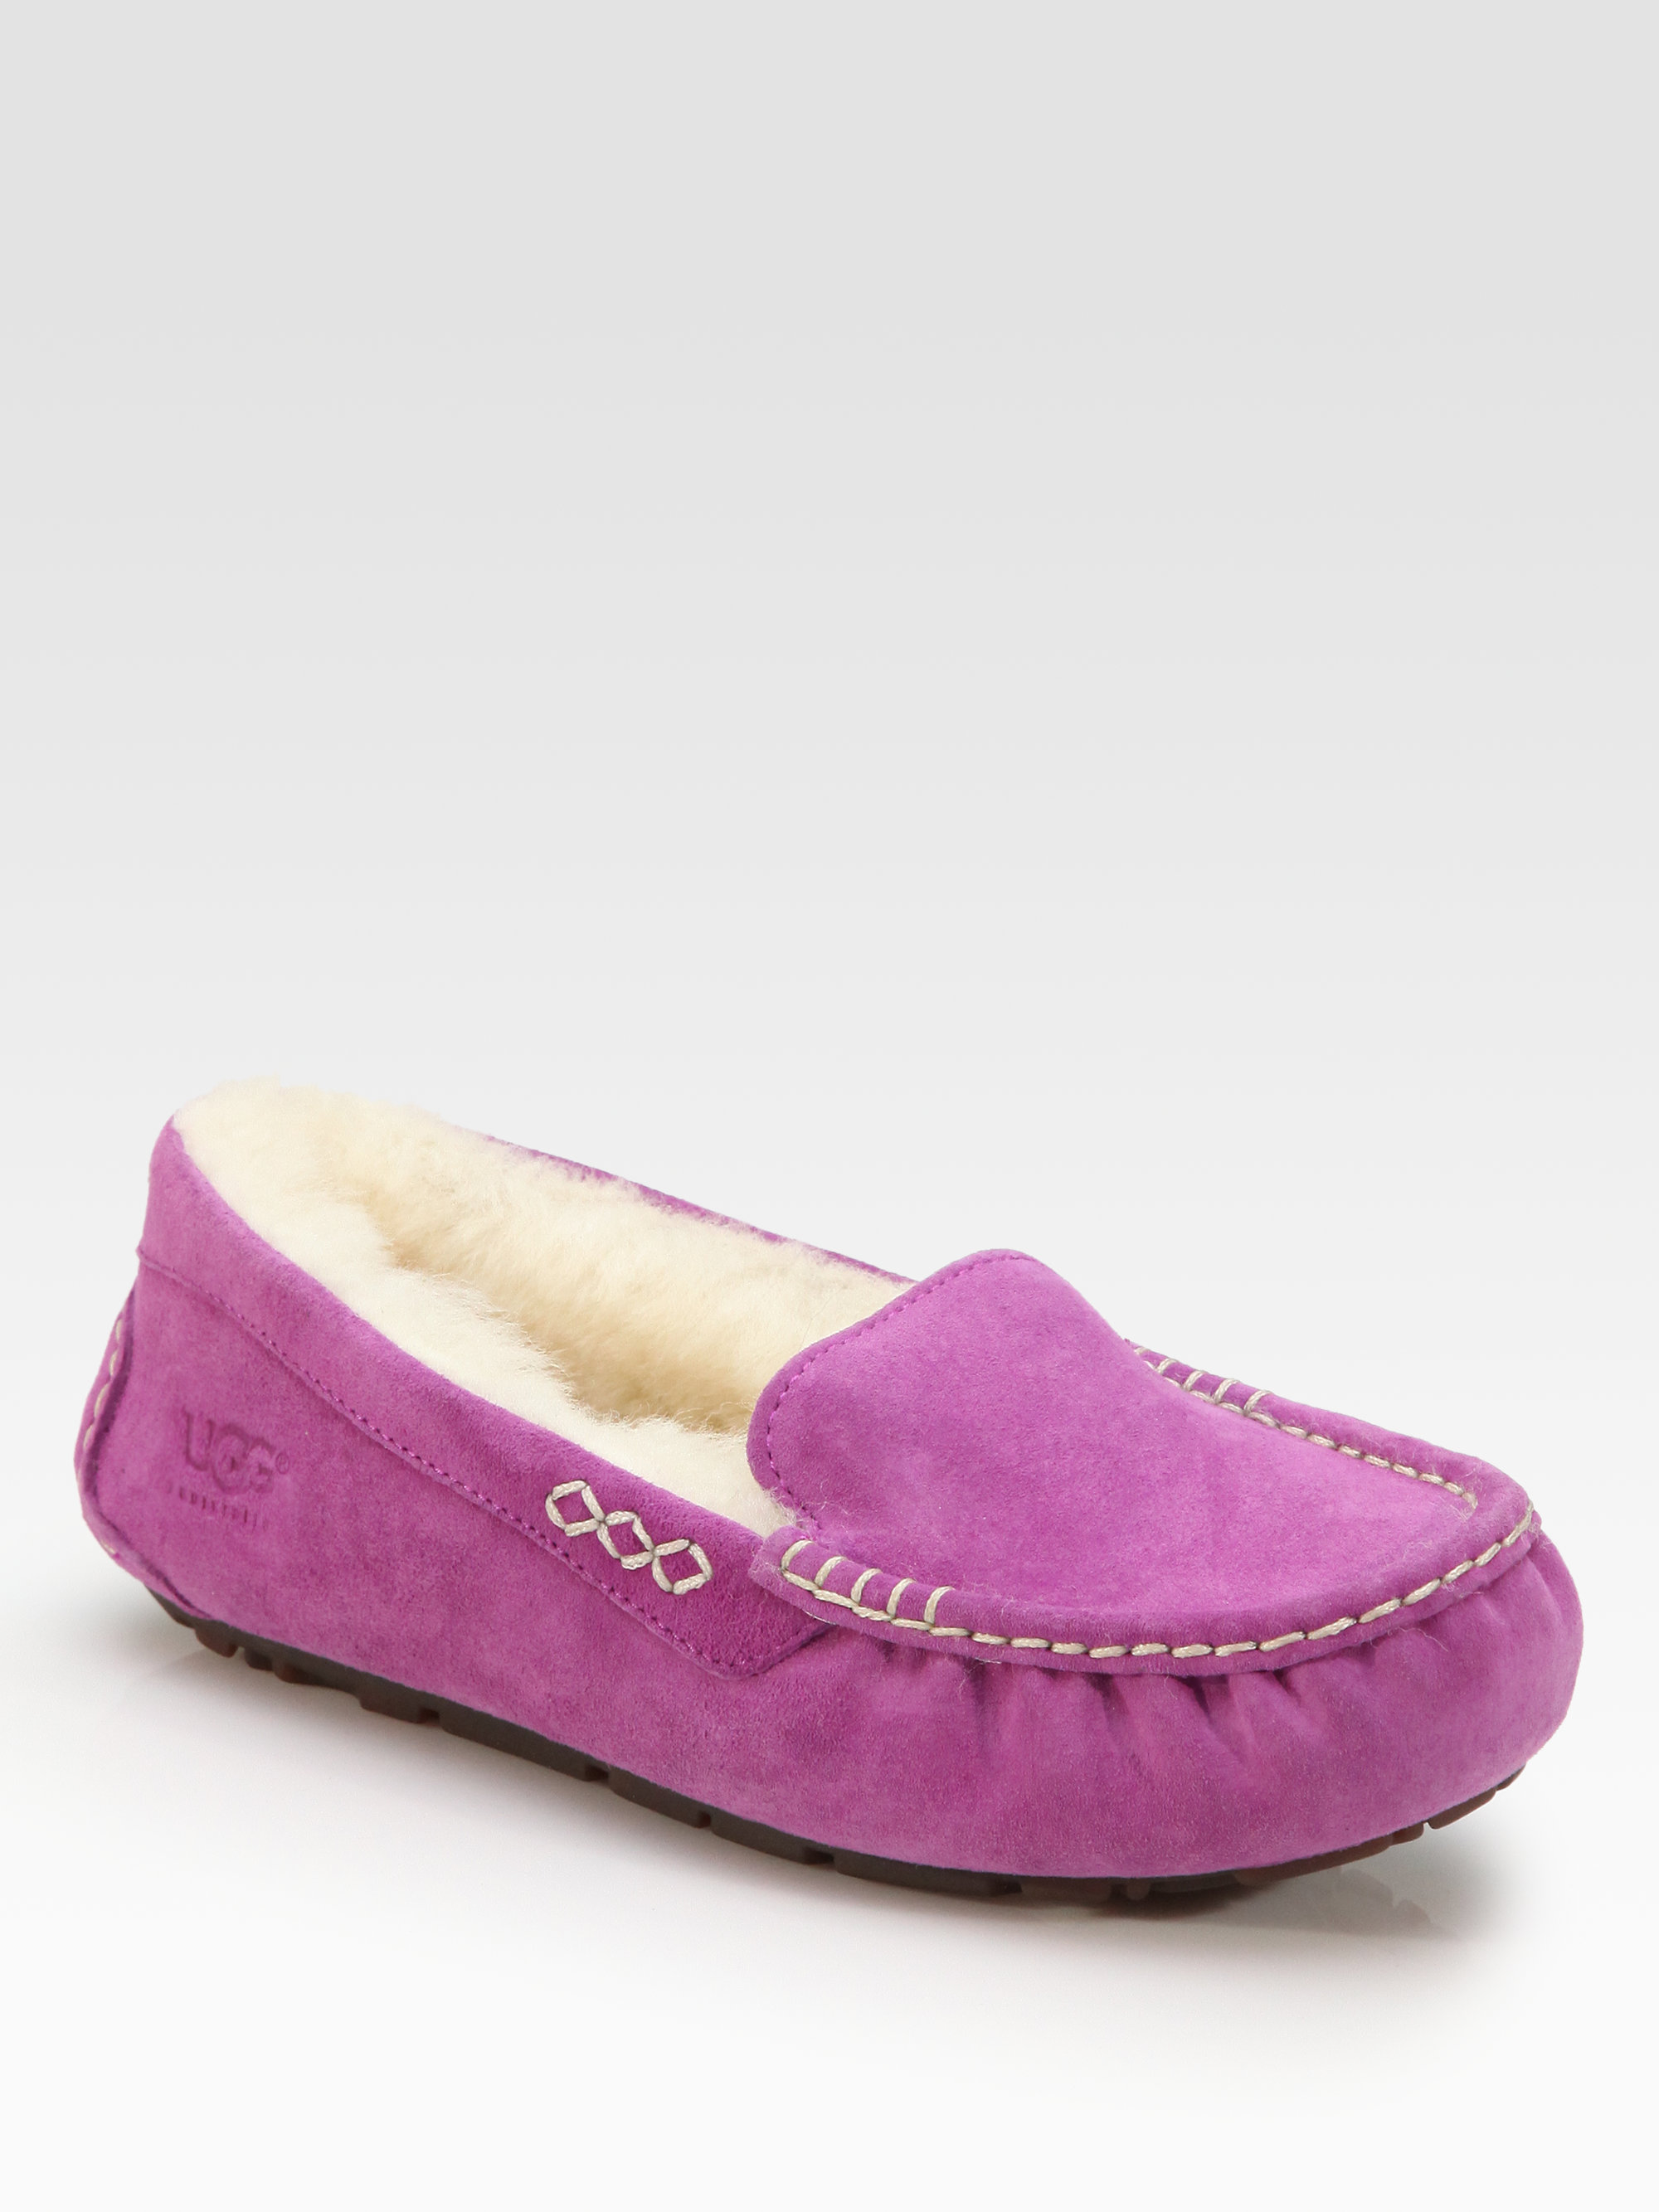 Ugg Ansley Suede Uggpure Moccasin Slippers in Pink (CACTUS FLOWER)